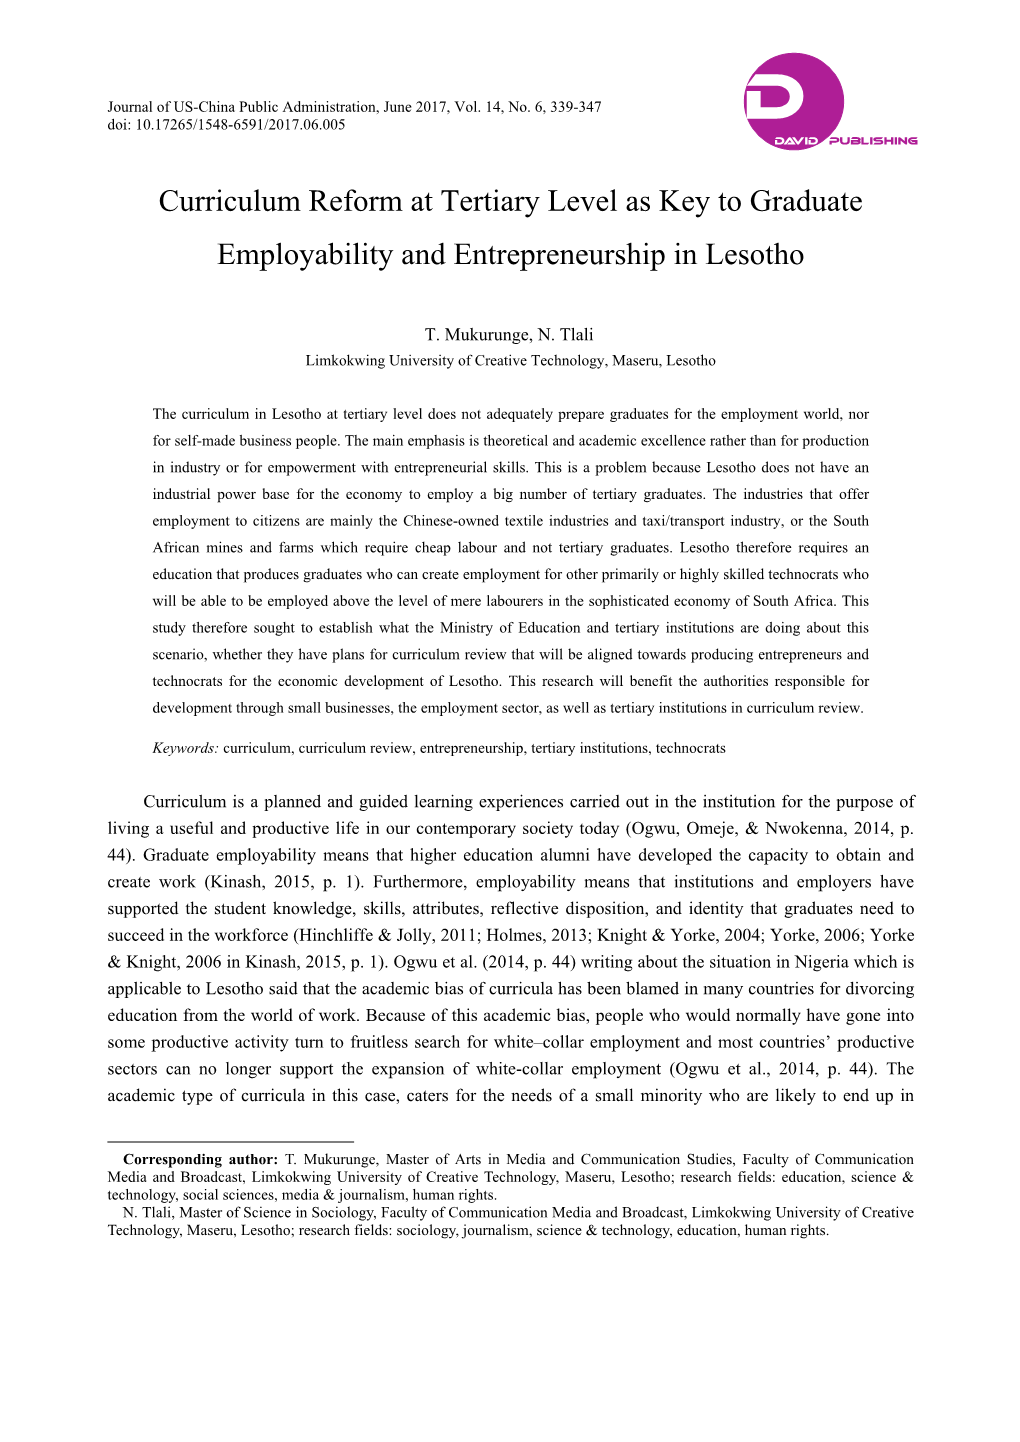 Curriculum Reform at Tertiary Level As Key to Graduate Employability and Entrepreneurship in Lesotho